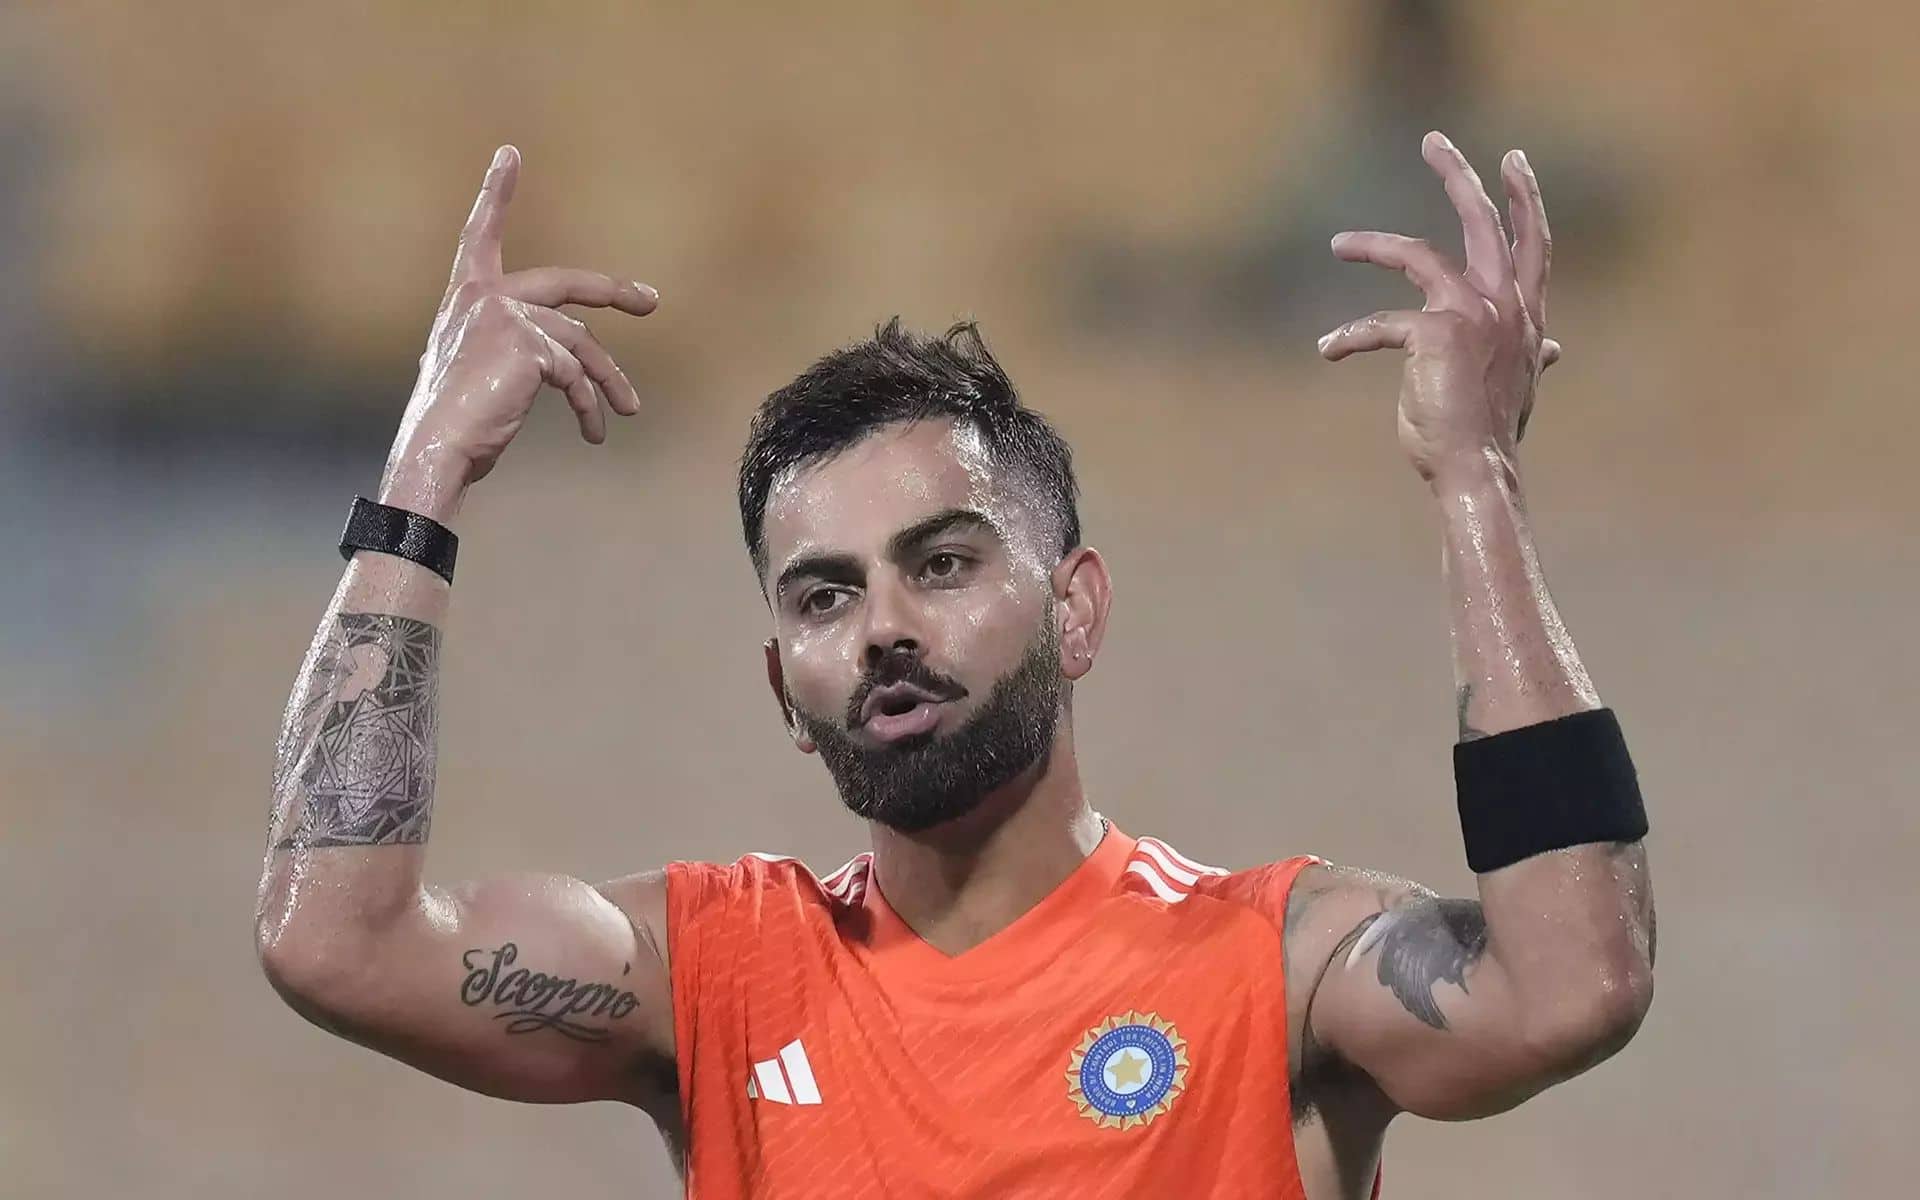 Kohli is a fitness icon for many budding cricketers (x.com)